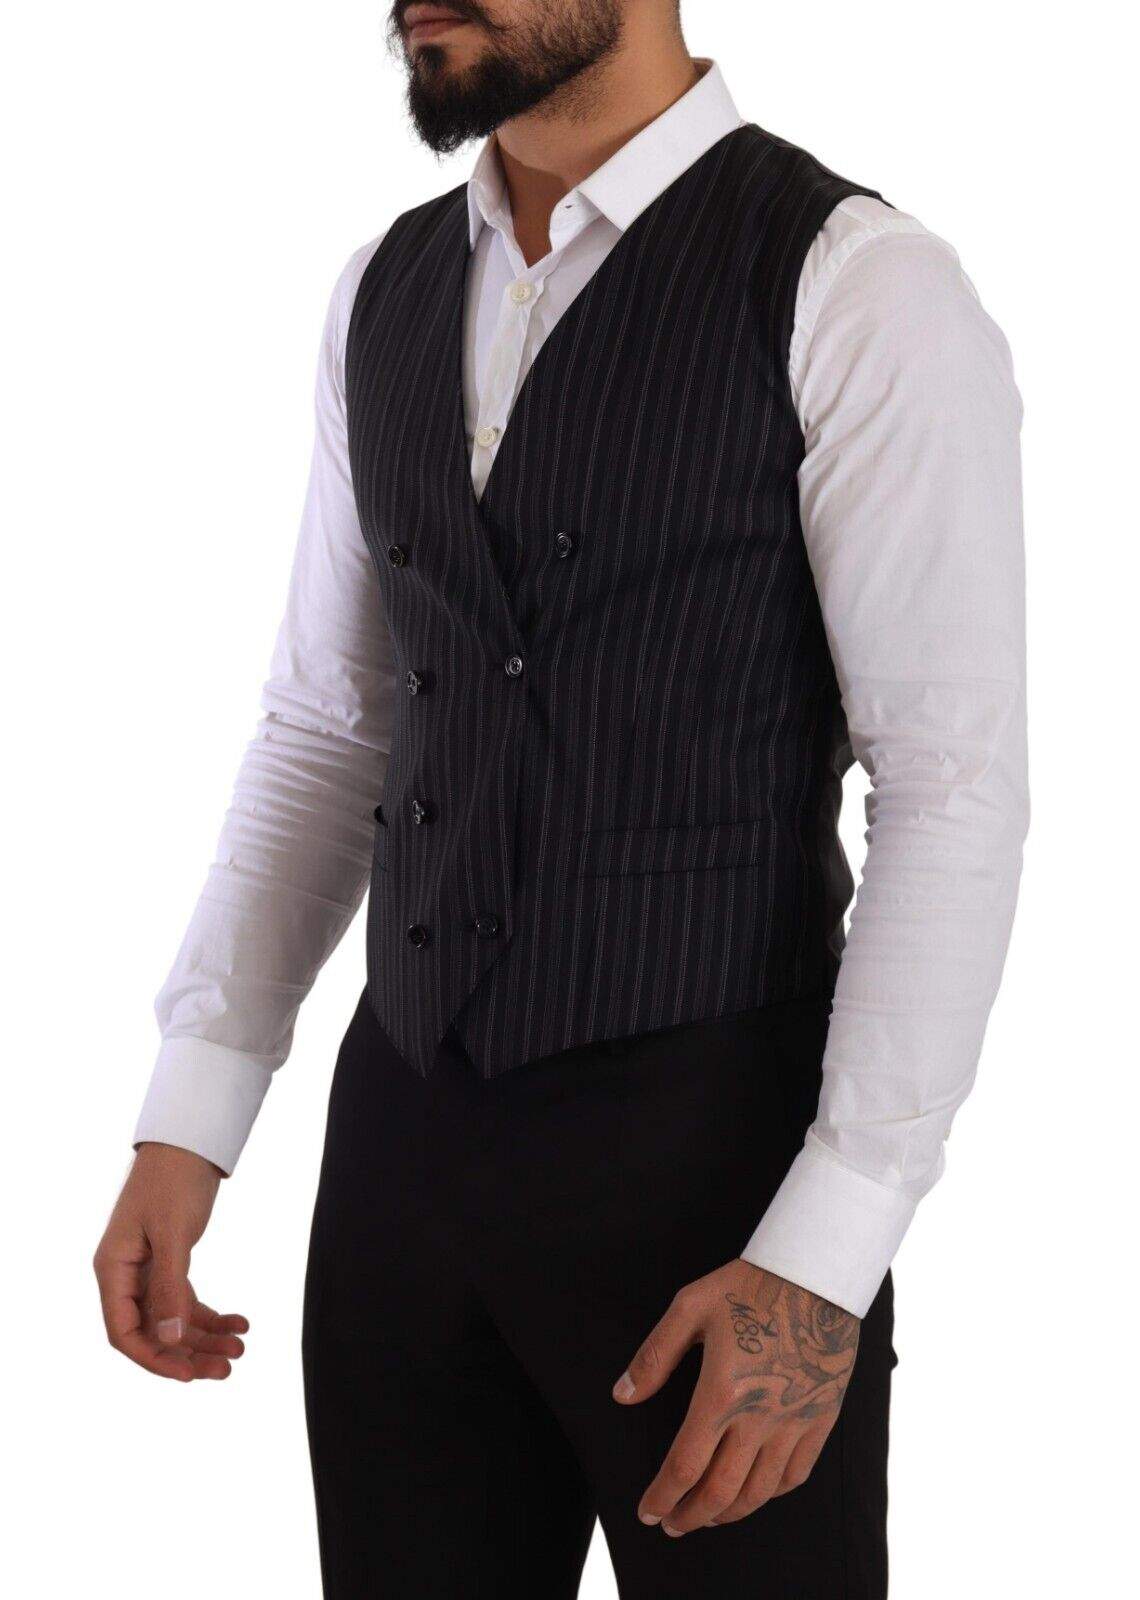 Dolce & Gabbana Gray Striped Double Breasted Waistcoat Vest #men, Black and Gray, Dolce & Gabbana, feed-1, IT48 | M, Vests - Men - Clothing at SEYMAYKA